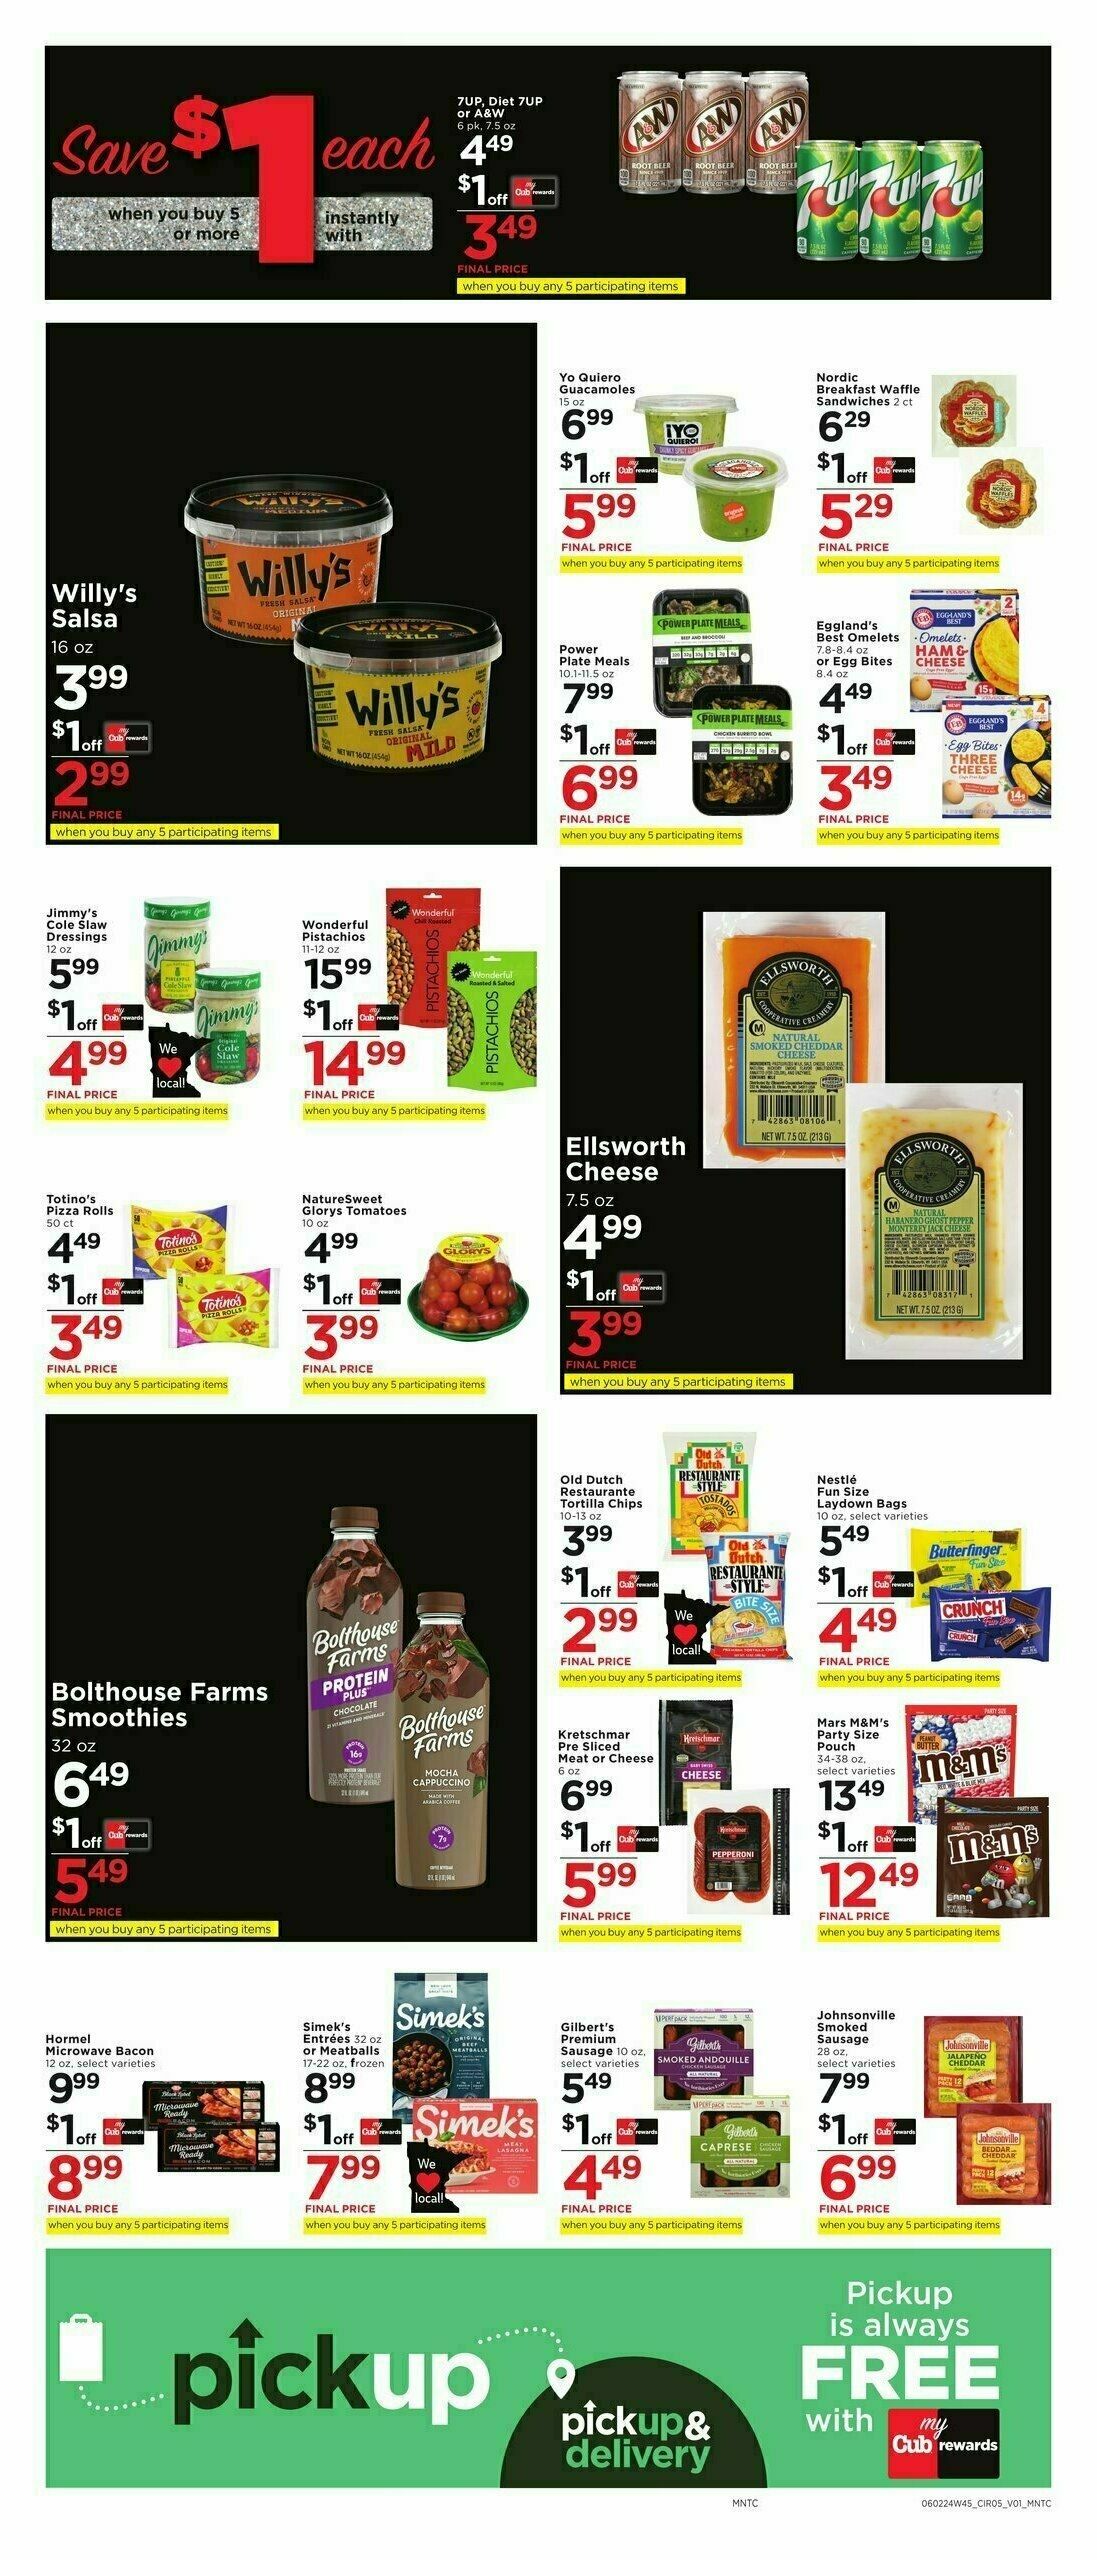 Cub Foods Weekly Ad from June 2